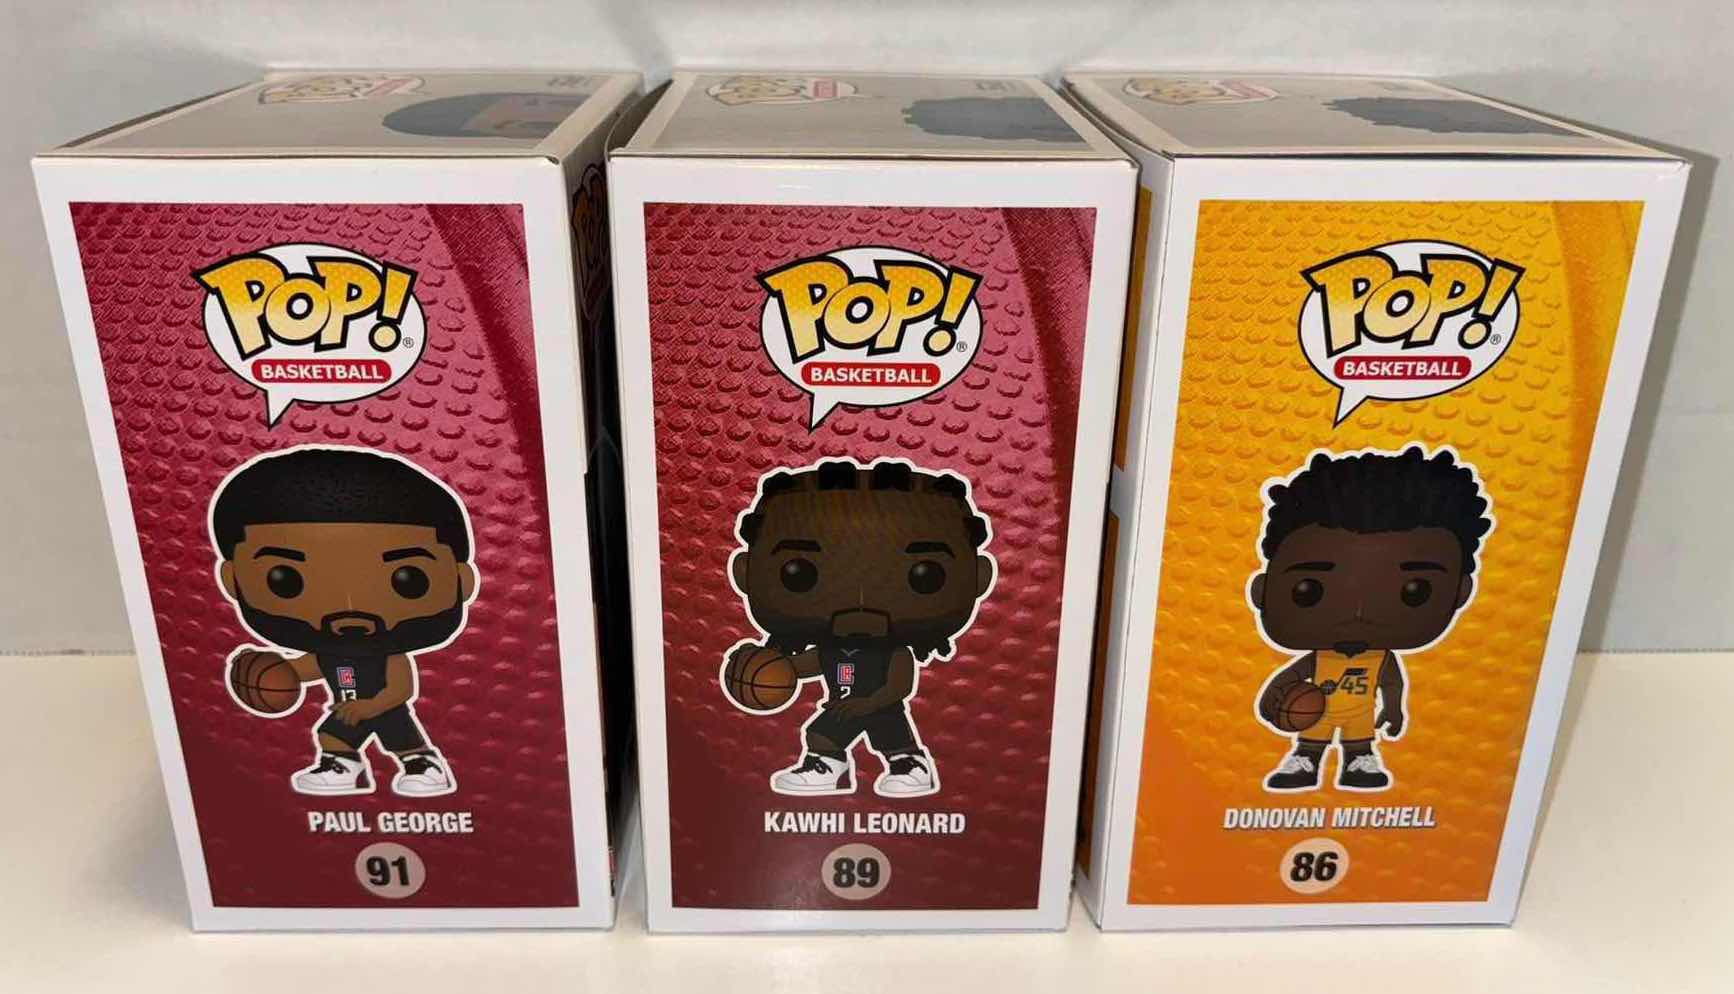 Photo 2 of NEW FUNKO POP! BASKETBALL VINYL FIGURE MIXED 6-PACK, CLIPPERS #91 PAUL GEORGE (3), CLIPPERS #89 KAWHI LEONARD (2), JAZZ #86 DONOVAN MITCHELL (1)